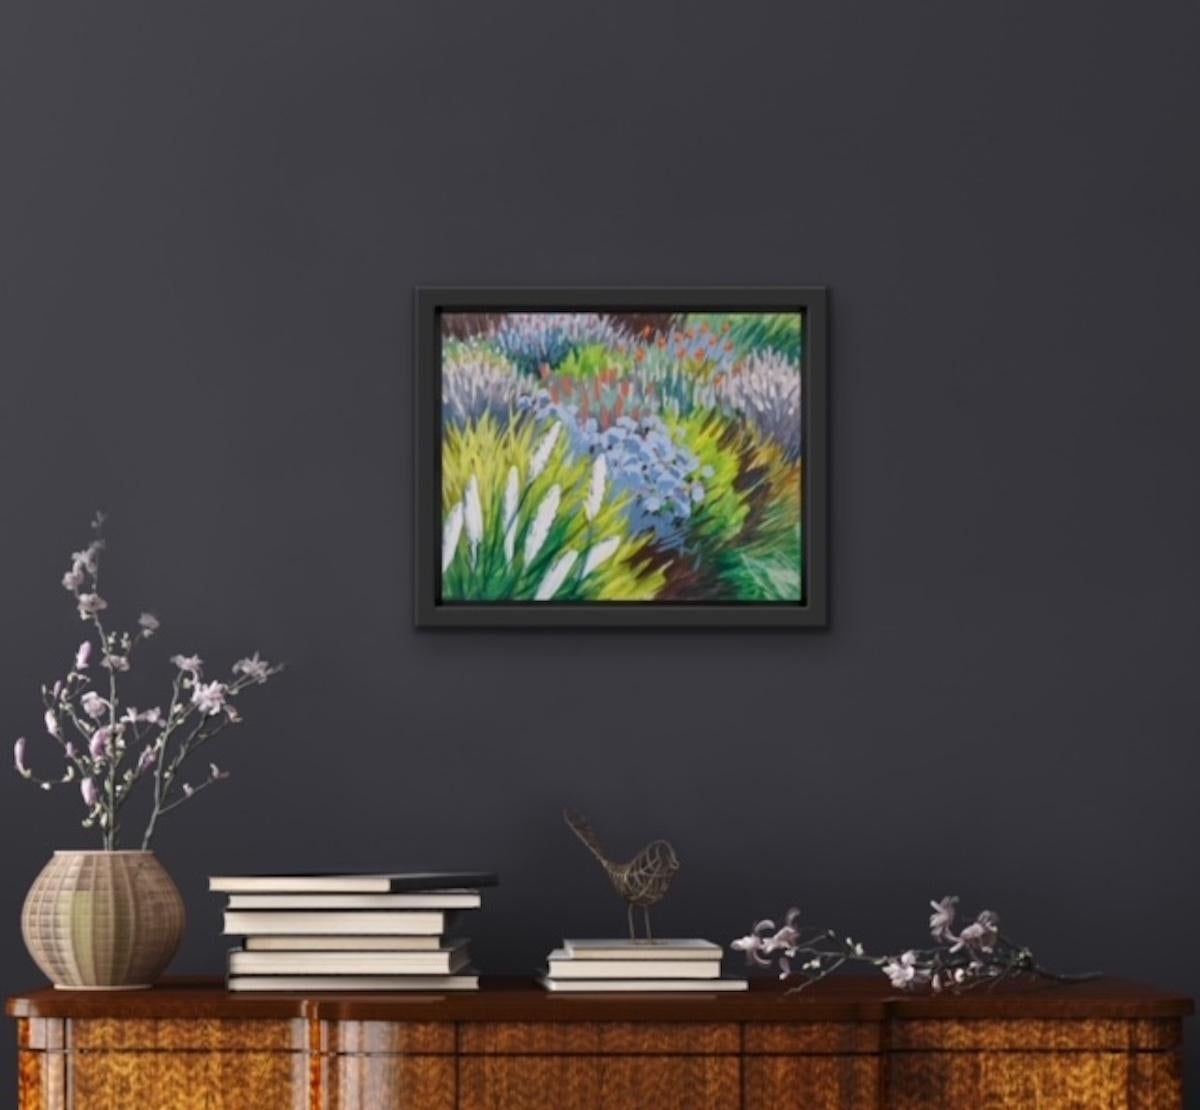 Grasses’ an Original Painting by Rosemary Farrer [2022]

original
Acrylic on canvas
Image size: H:40 cm x W:50 cm
Complete Size of Unframed Work: H:40 cm x W:50 cm x D:2cm
Sold Unframed
Please note that insitu images are purely an indication of how